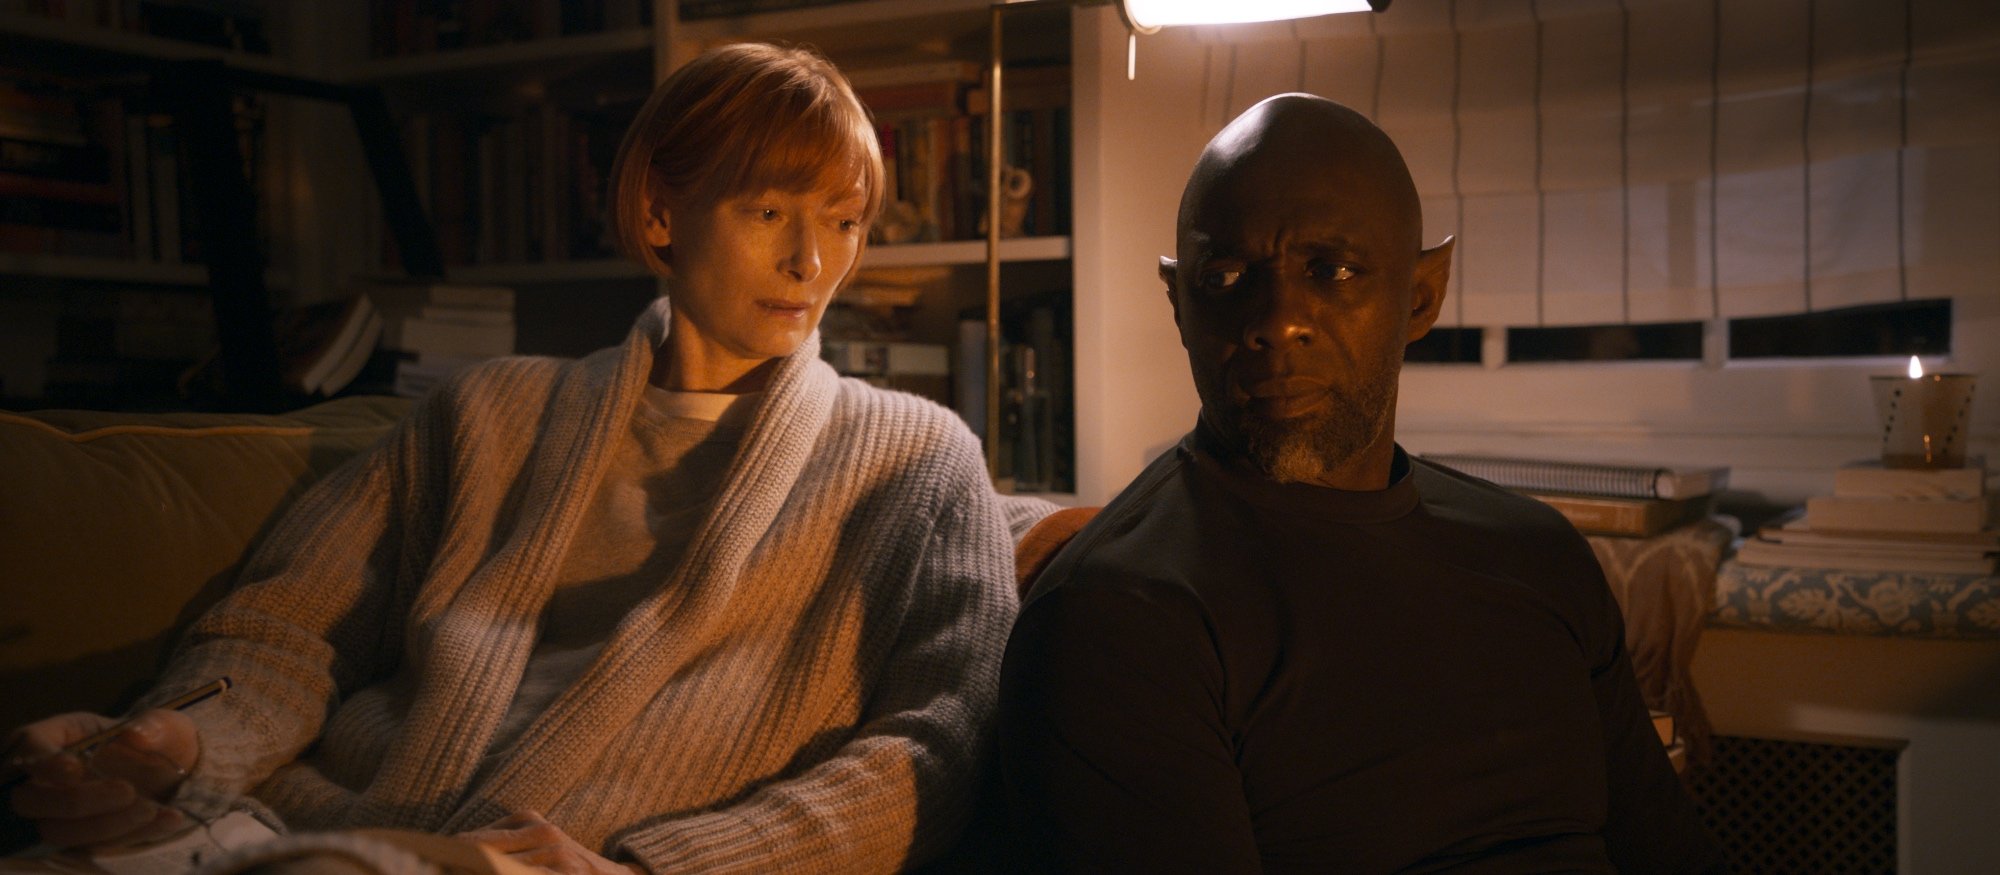 'Three Thousand Years of Longing' Tilda Swinton as Alithea and Idris Elba as The Djinn sitting next to each other on the couch side-eyeing each other with a bookcase behind them